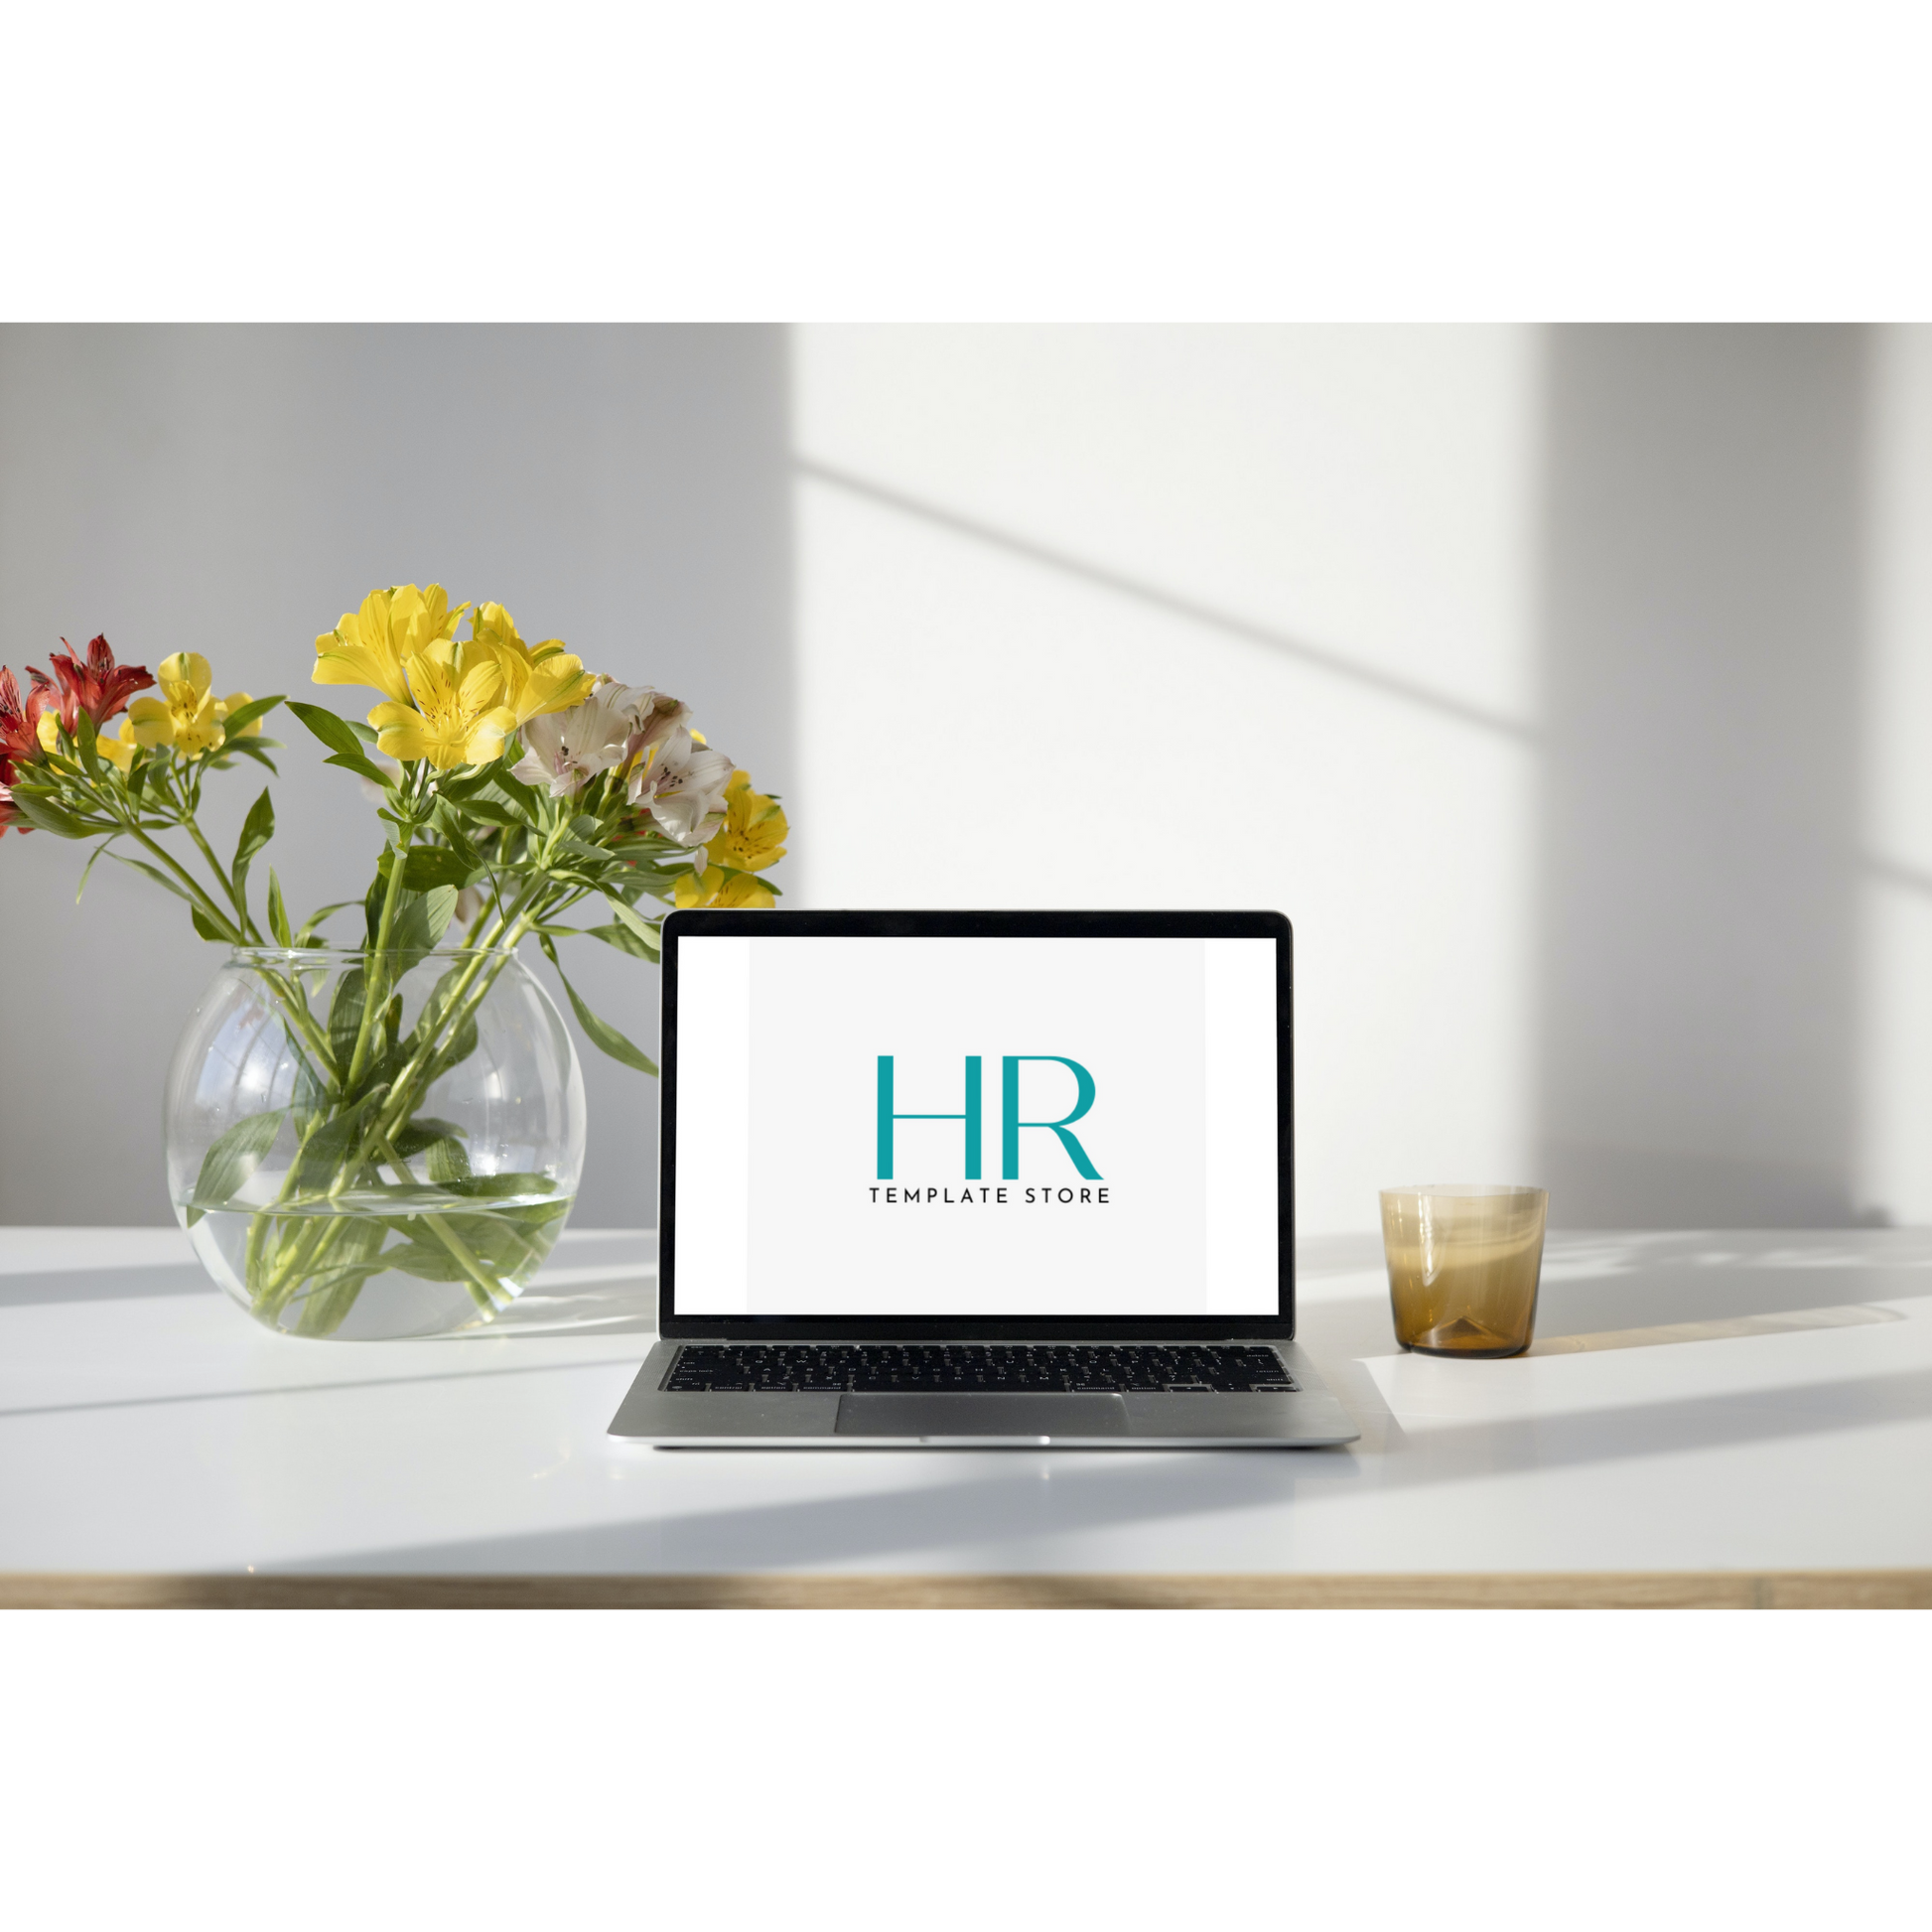 The HR Template Store logo displayed on a laptop placed on a tidy and organized desktop.